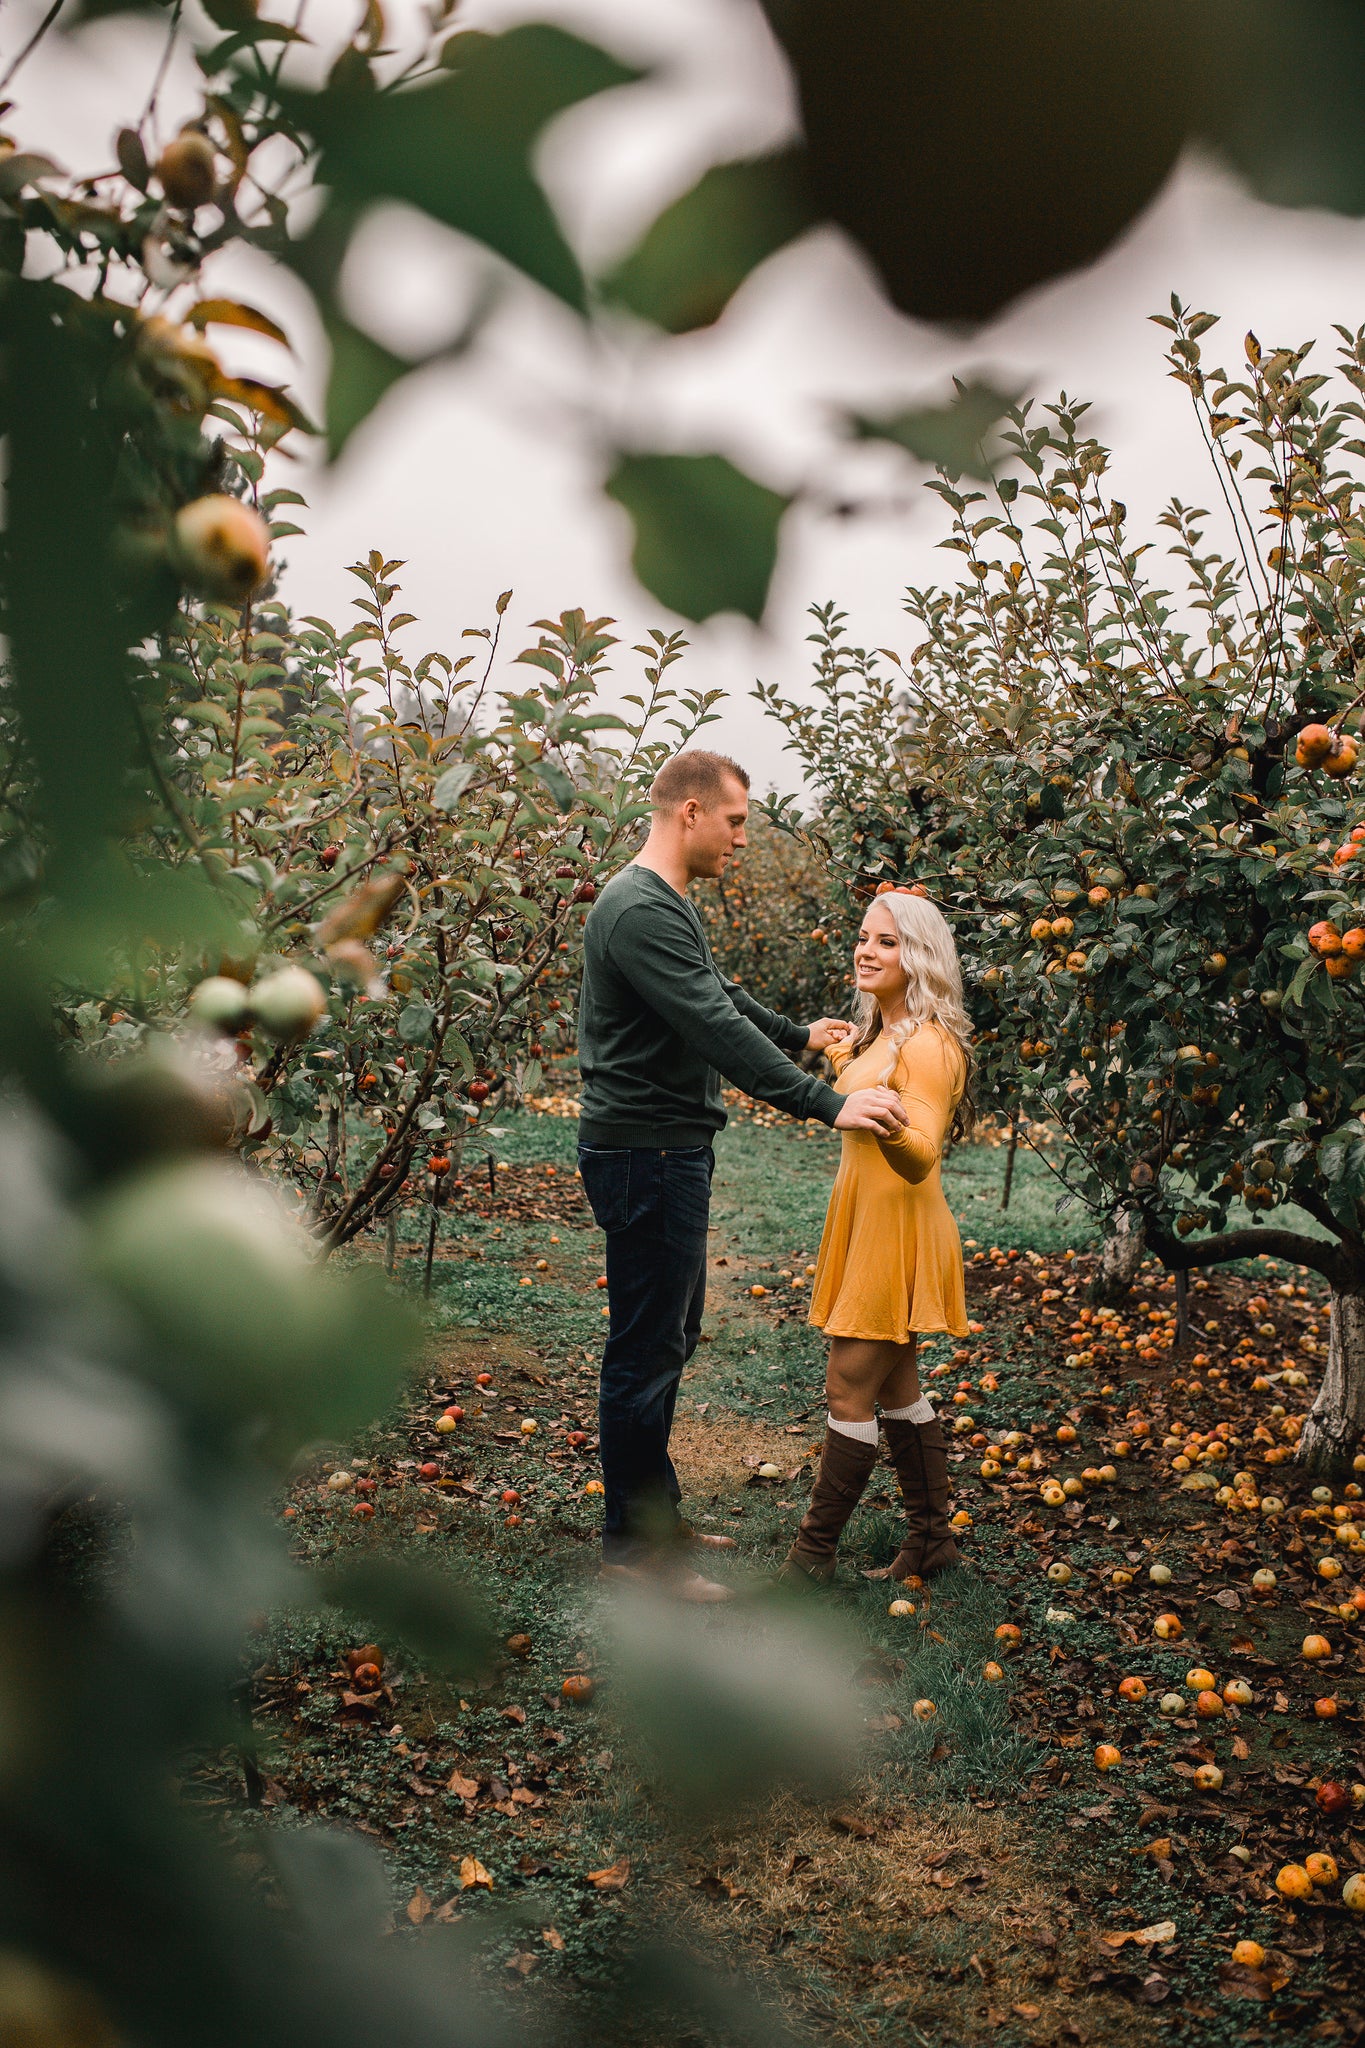 5 Engagement Session Tips by Ella Winston